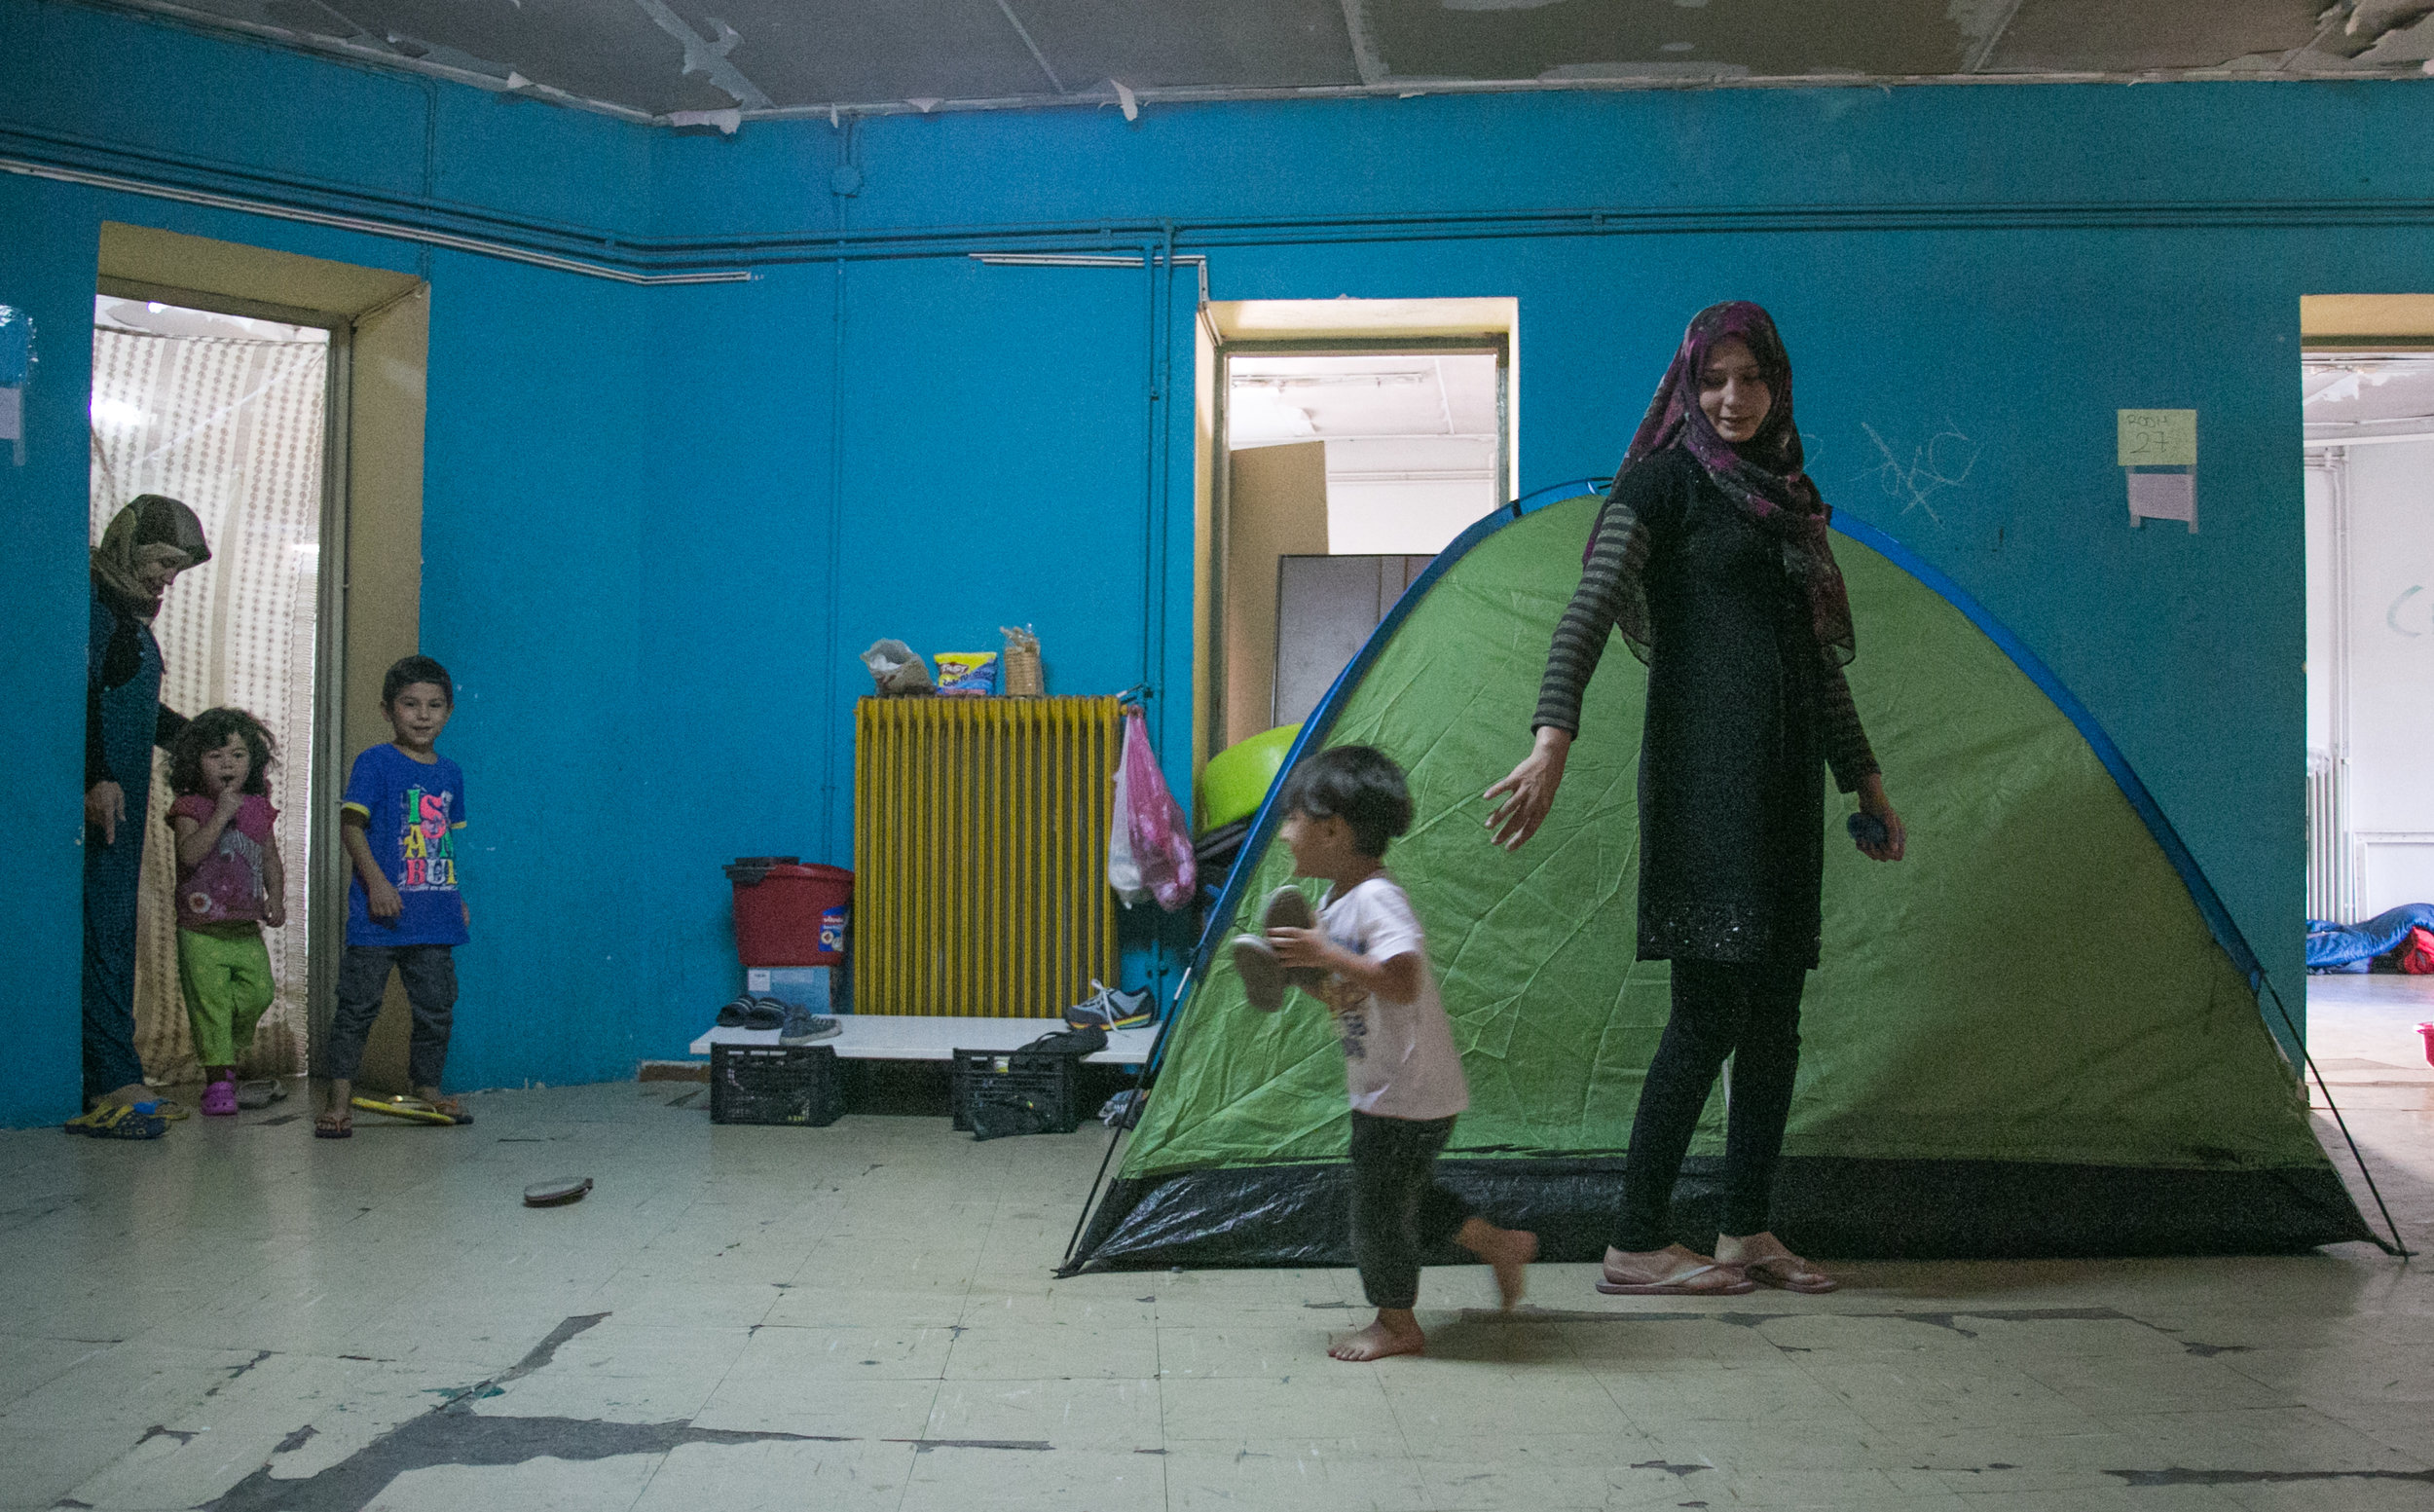     10/19/16 - Ali Alowi and his mother walk through the dark hallway of the third floor corridor. Tents take up any free space available in the school as refugees attempt to escape the dangers of the streets.&nbsp; 